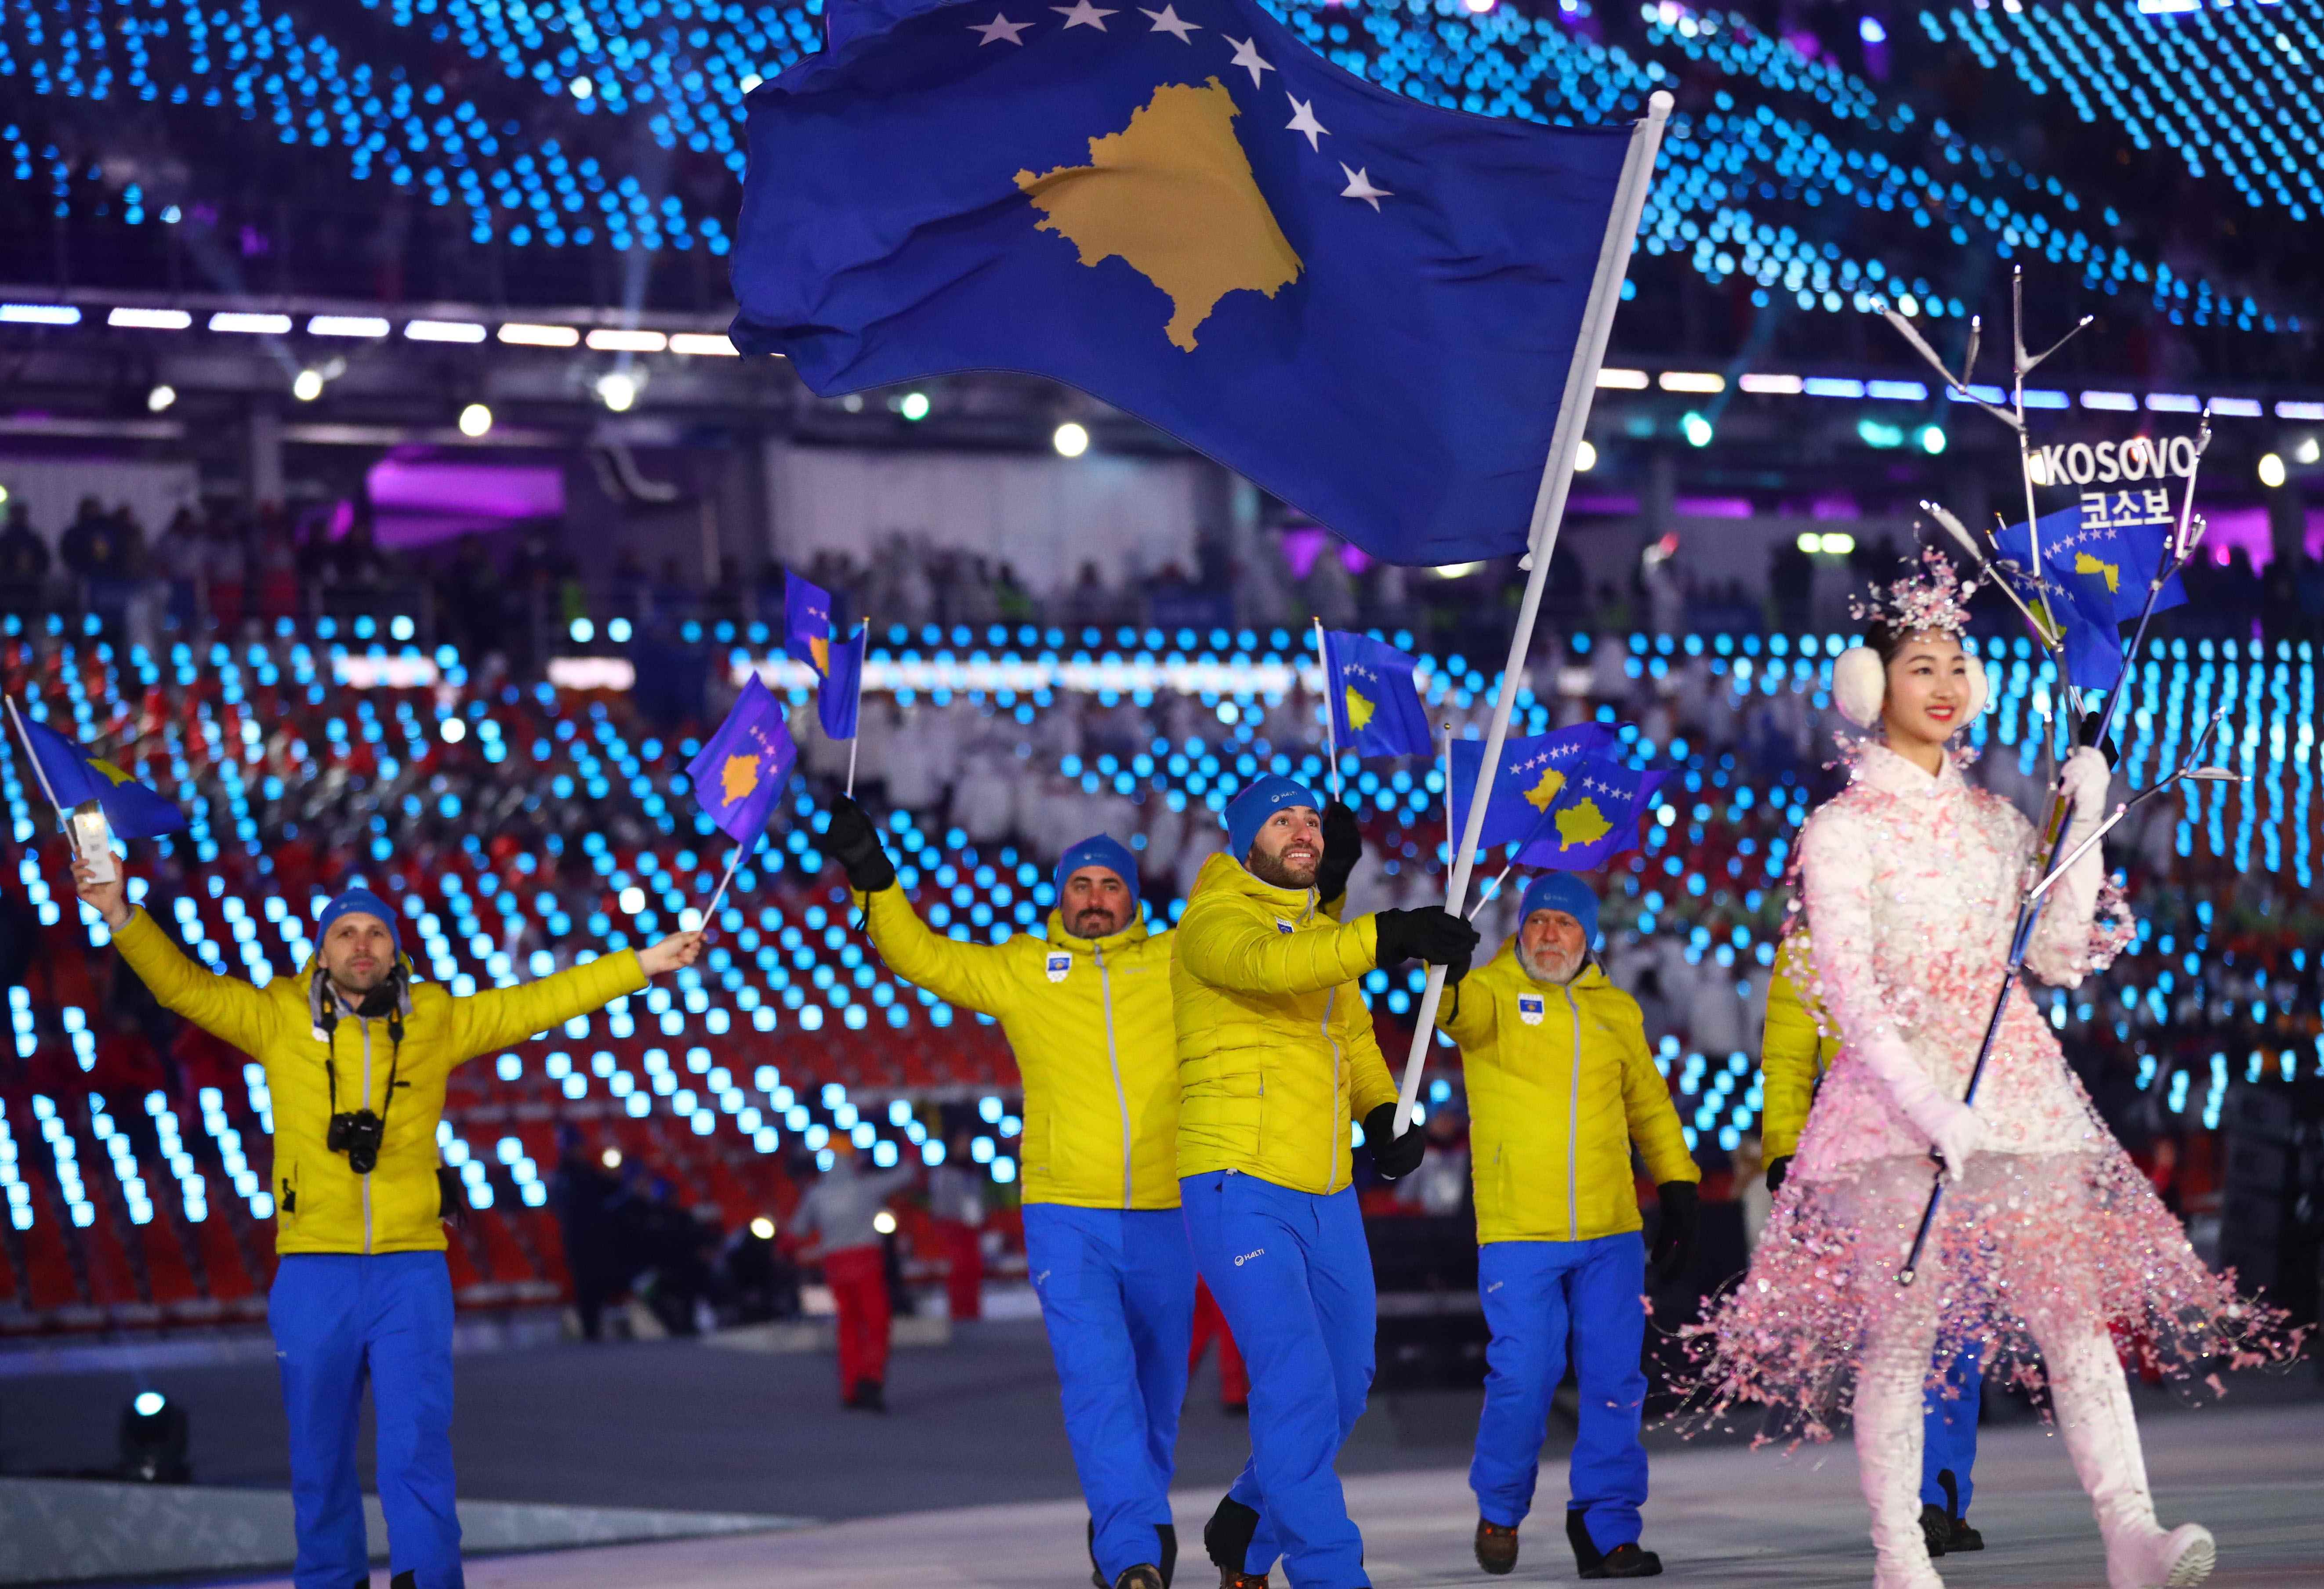 Kosovar athletes carry the national flag during the opening ceremony of the 2018 Winter Olympics (by Reuters)